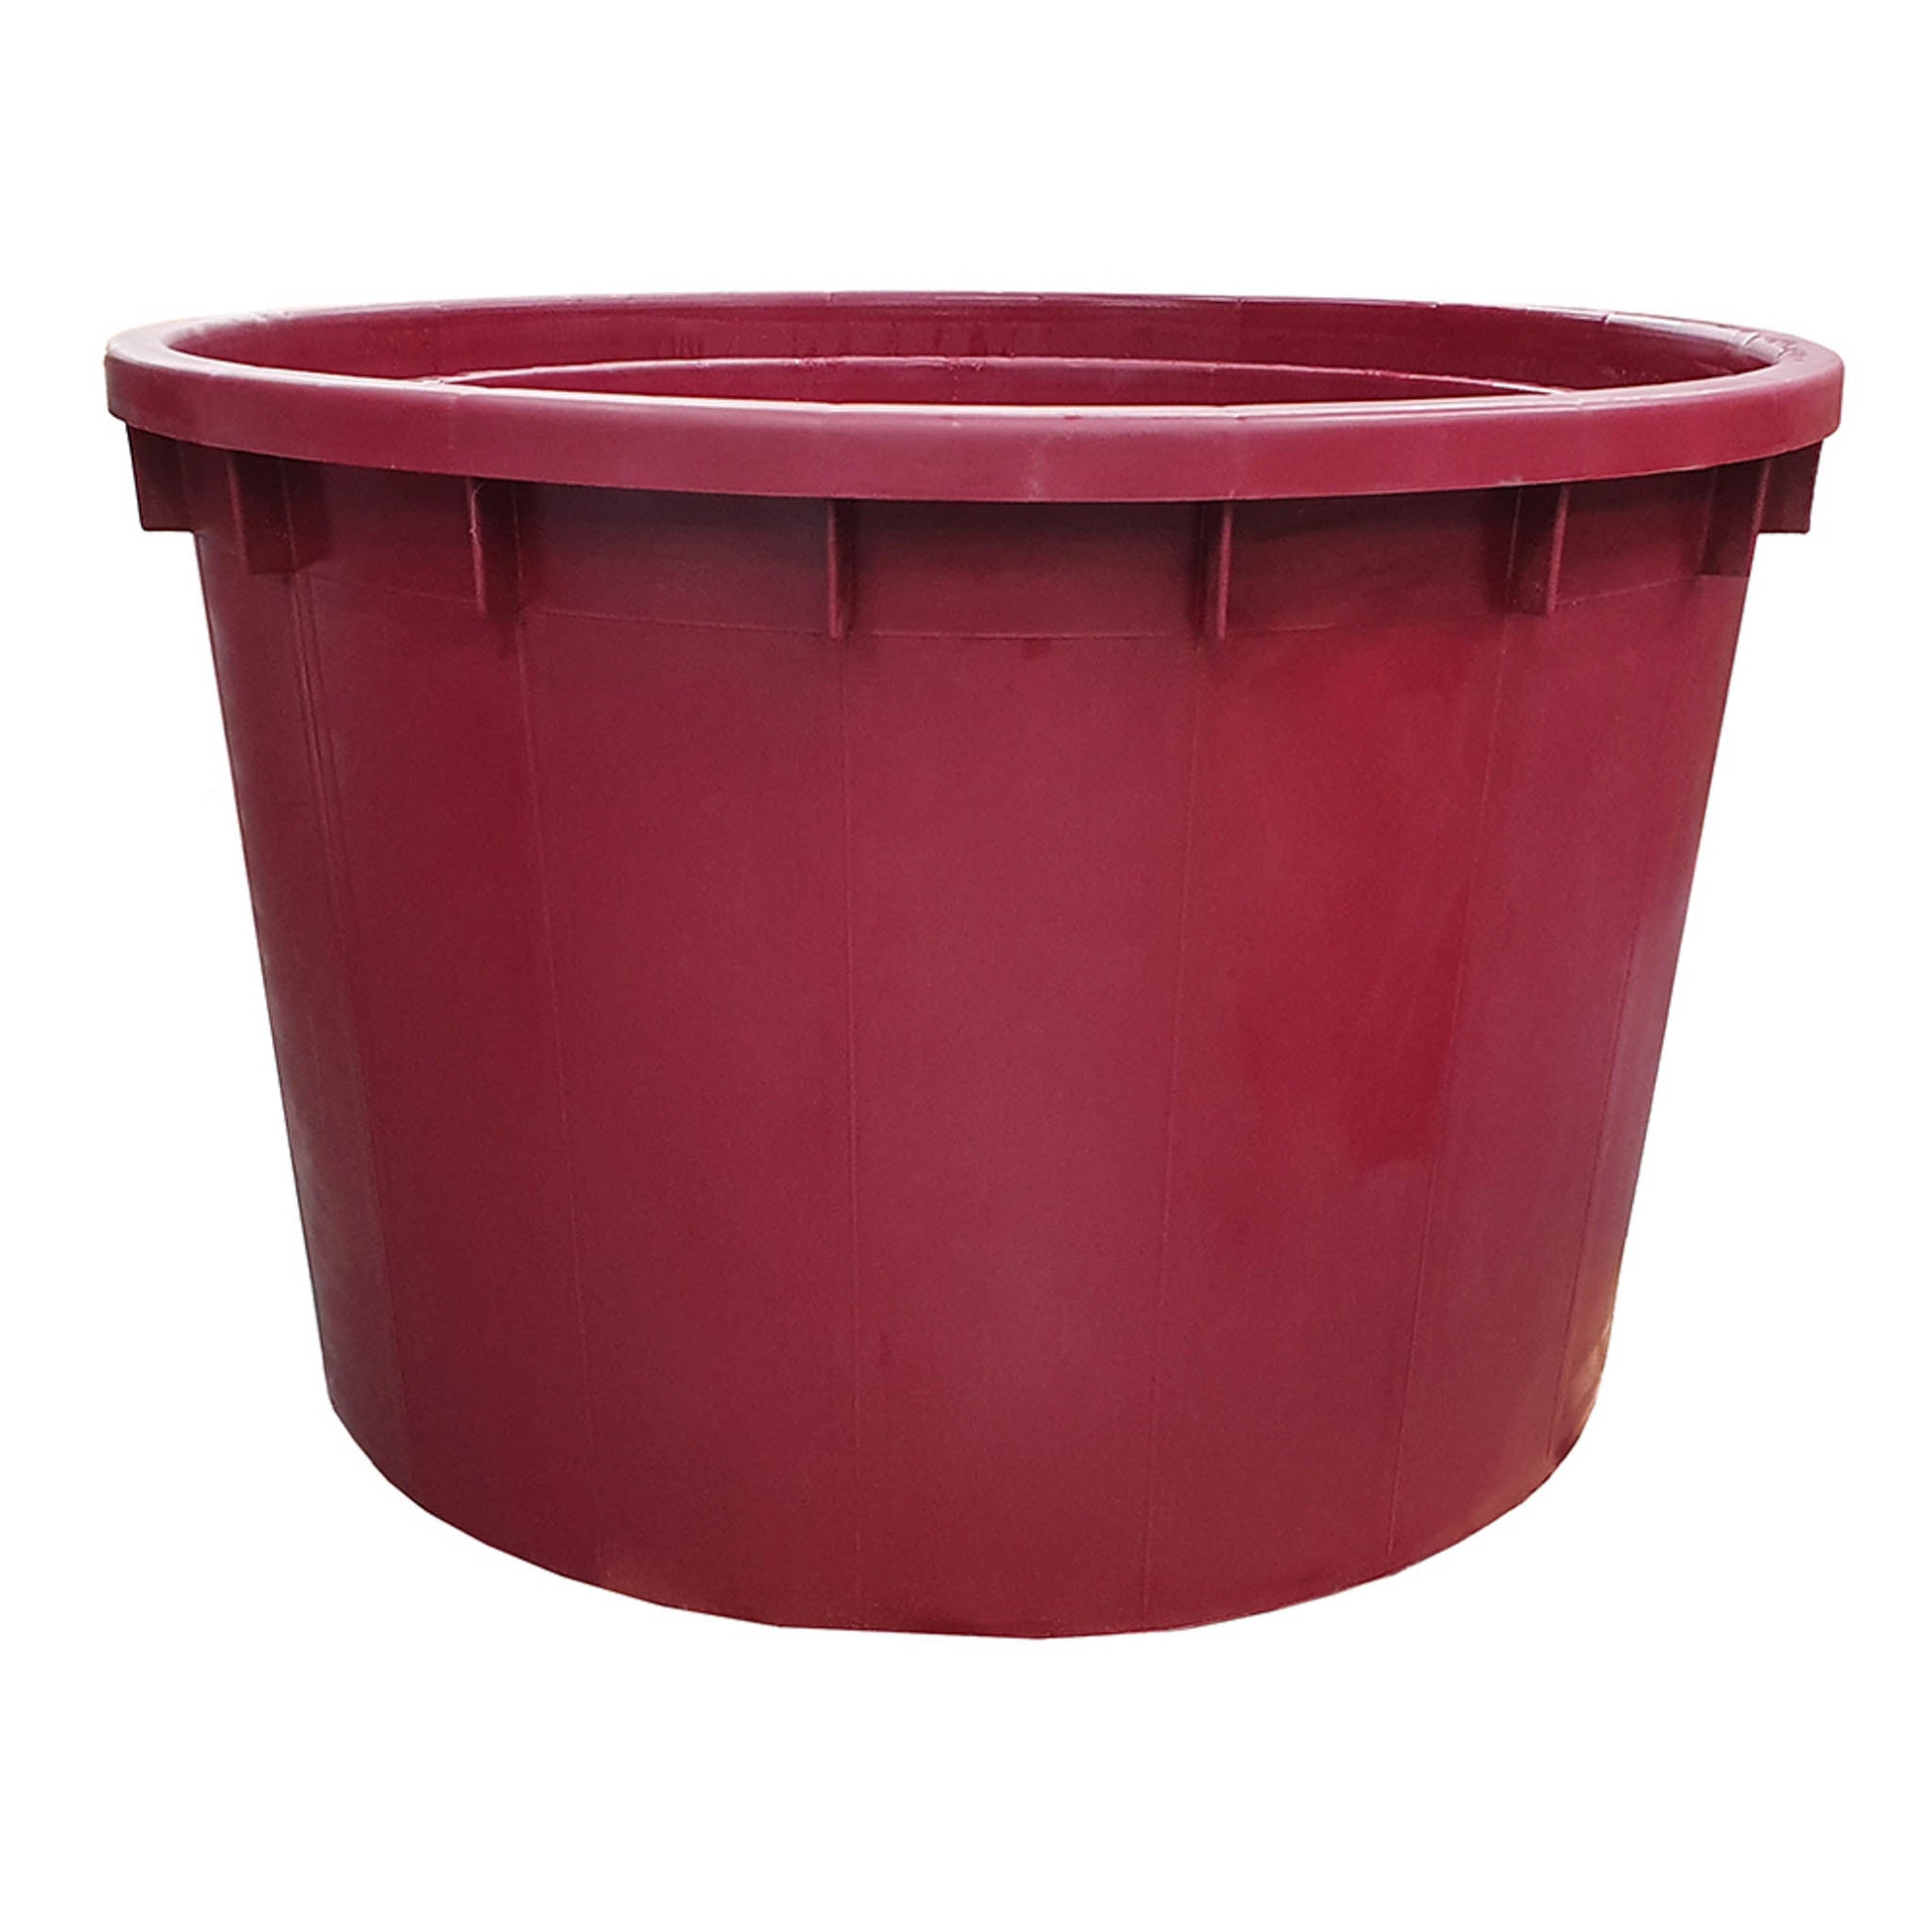 Italian Made 1000 litre red food grade plastic wine vat for storing and fermenting wine